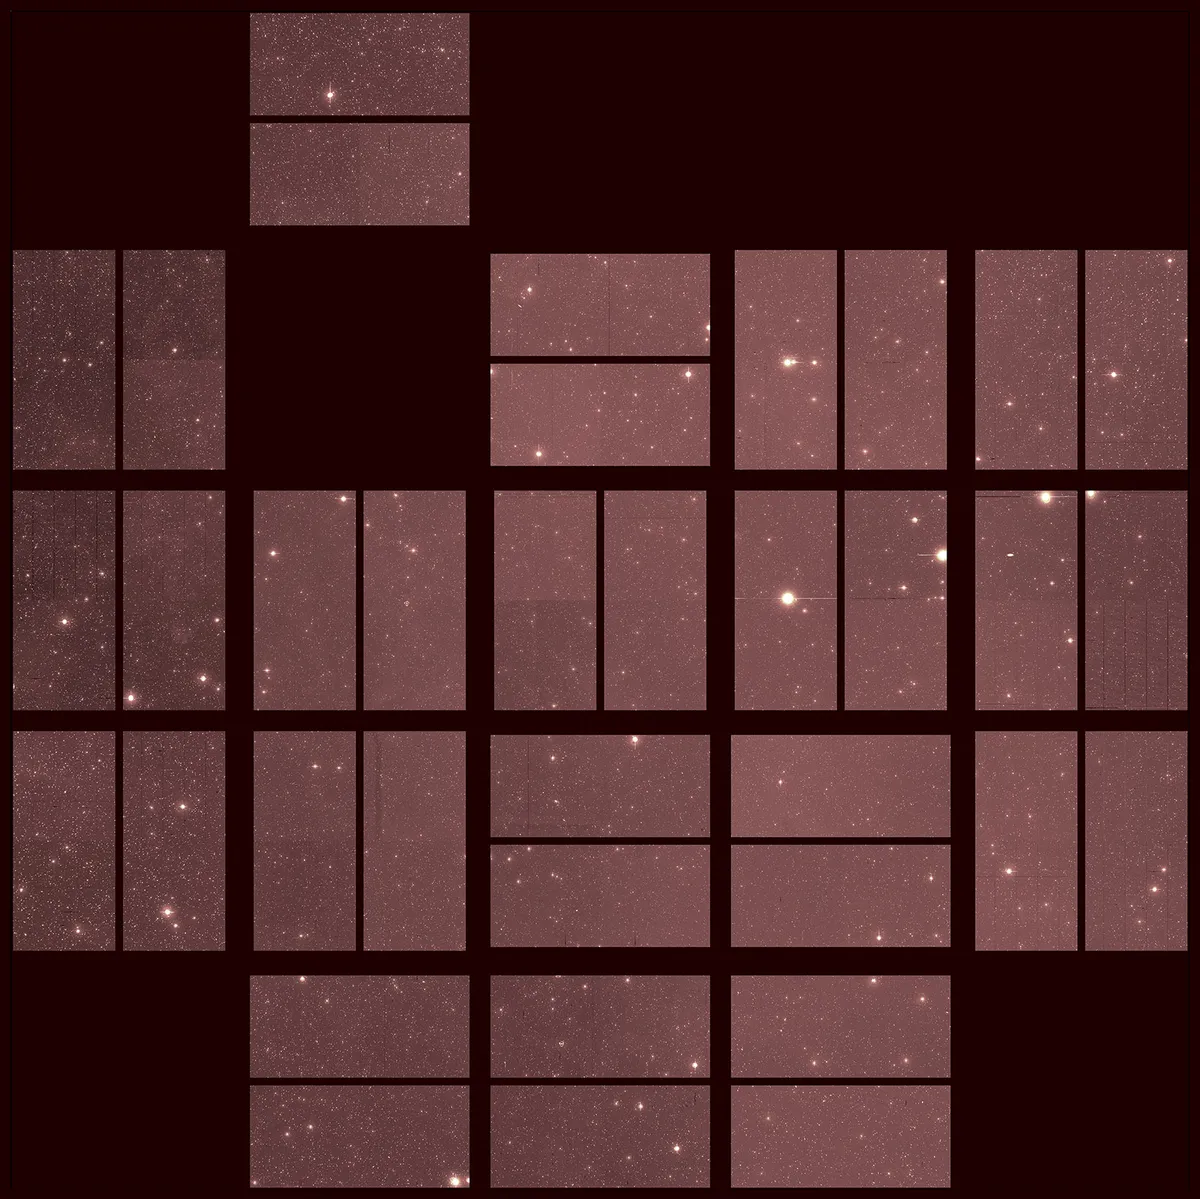 Kepler's final view of the night sky, pointed in the direction of the constellation Aquarius. Credit: NASA/Ames Research Center